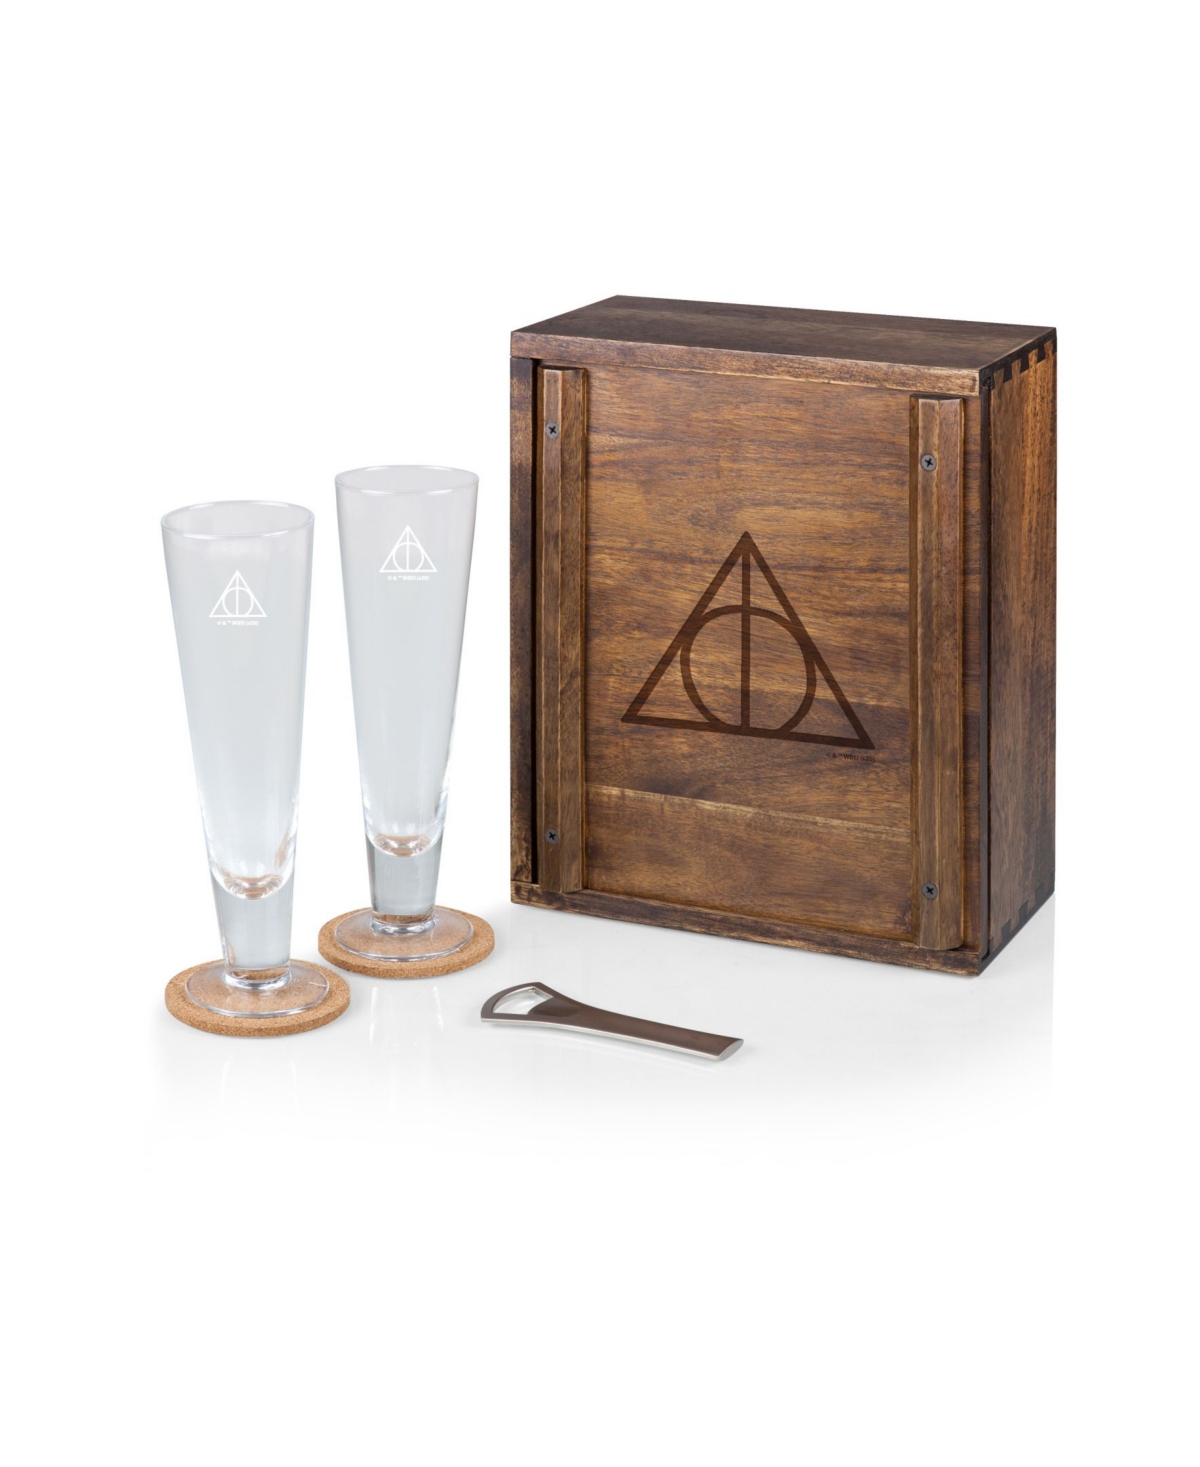 LEGACY HARRY POTTER DEATHLY HALLOWS BEVERAGE GLASS GIFT SET, 6 PIECES